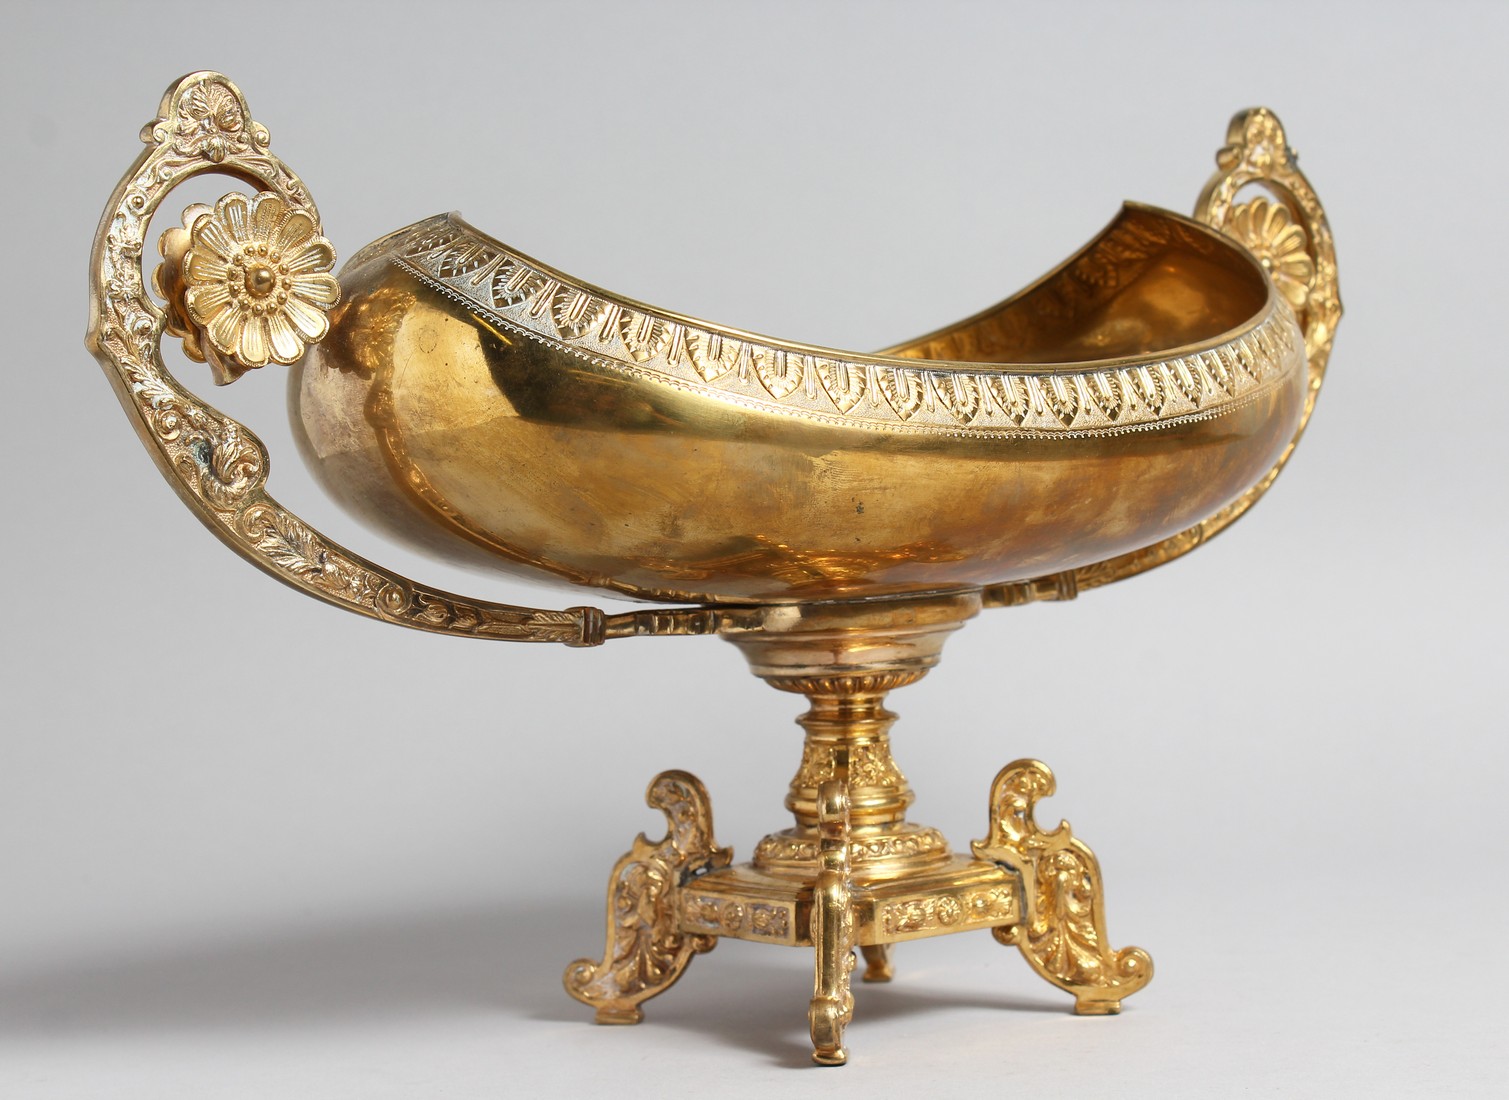 A DECORATIVE CLASSICAL STYLE GILT BRONZE TWIN HANDLED PEDESTAL OVAL SHAPE BOWL. 15.5ins high. - Image 4 of 4